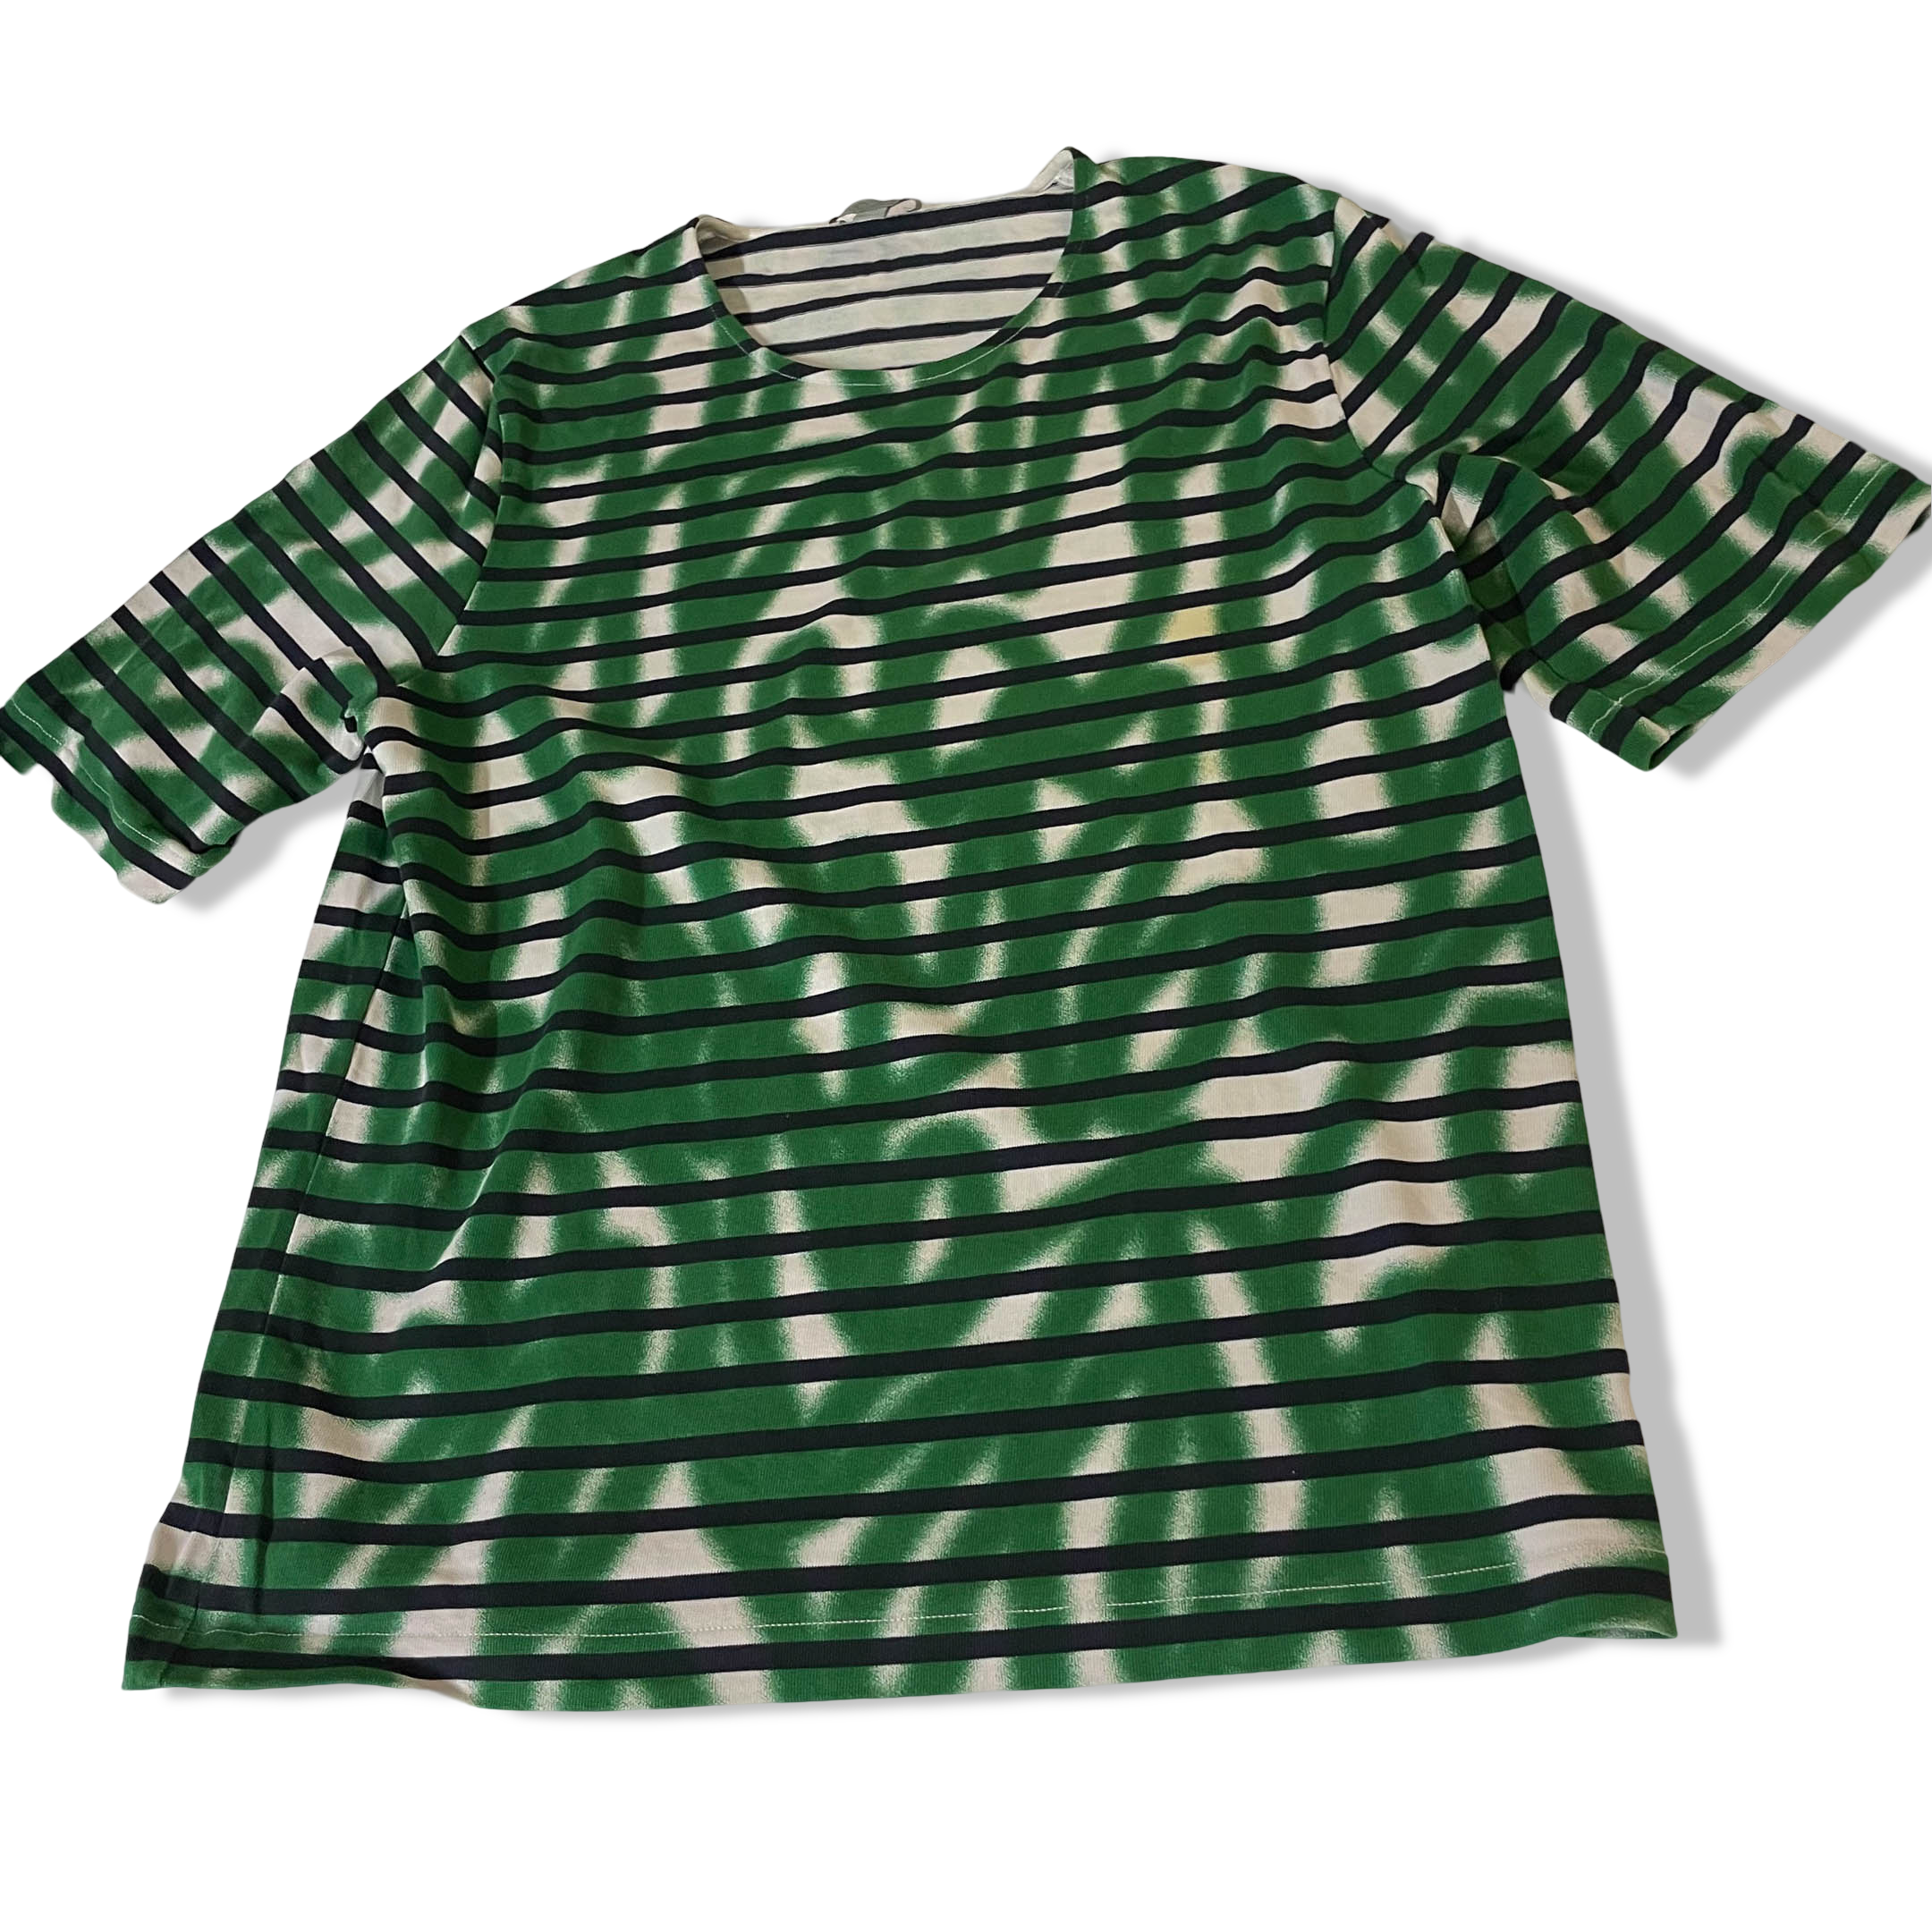 COS made in Portugal green stripped men's tees size M| L 26 W21| SKU 3766<br>